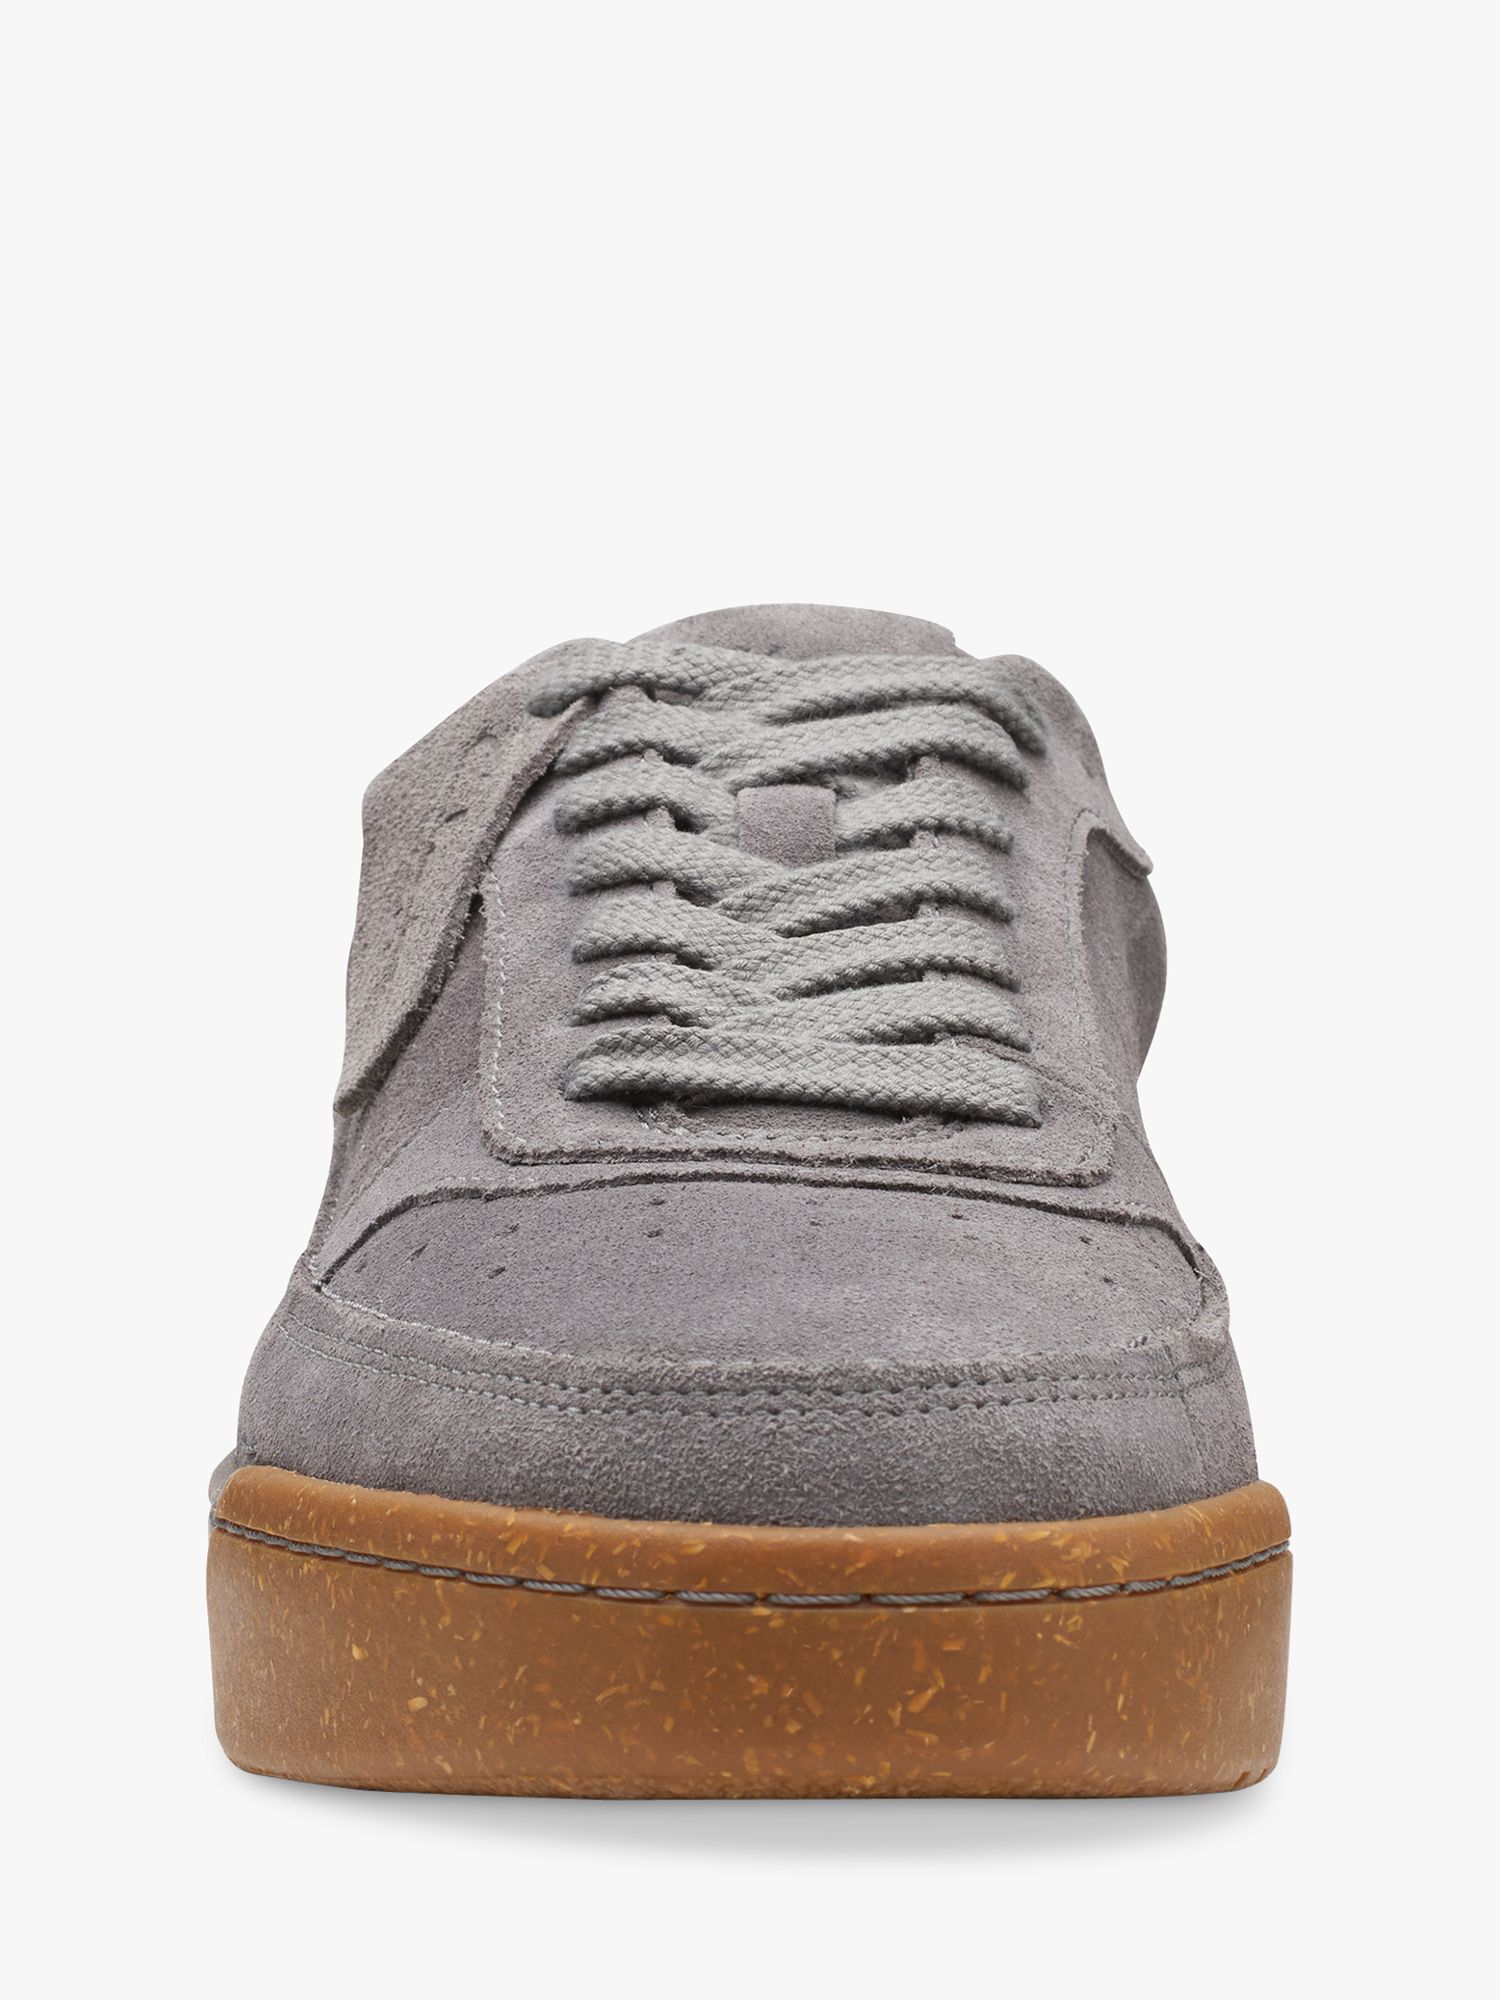 Clarks Craft Court Lace Suede Trainers, Grey at John Lewis & Partners